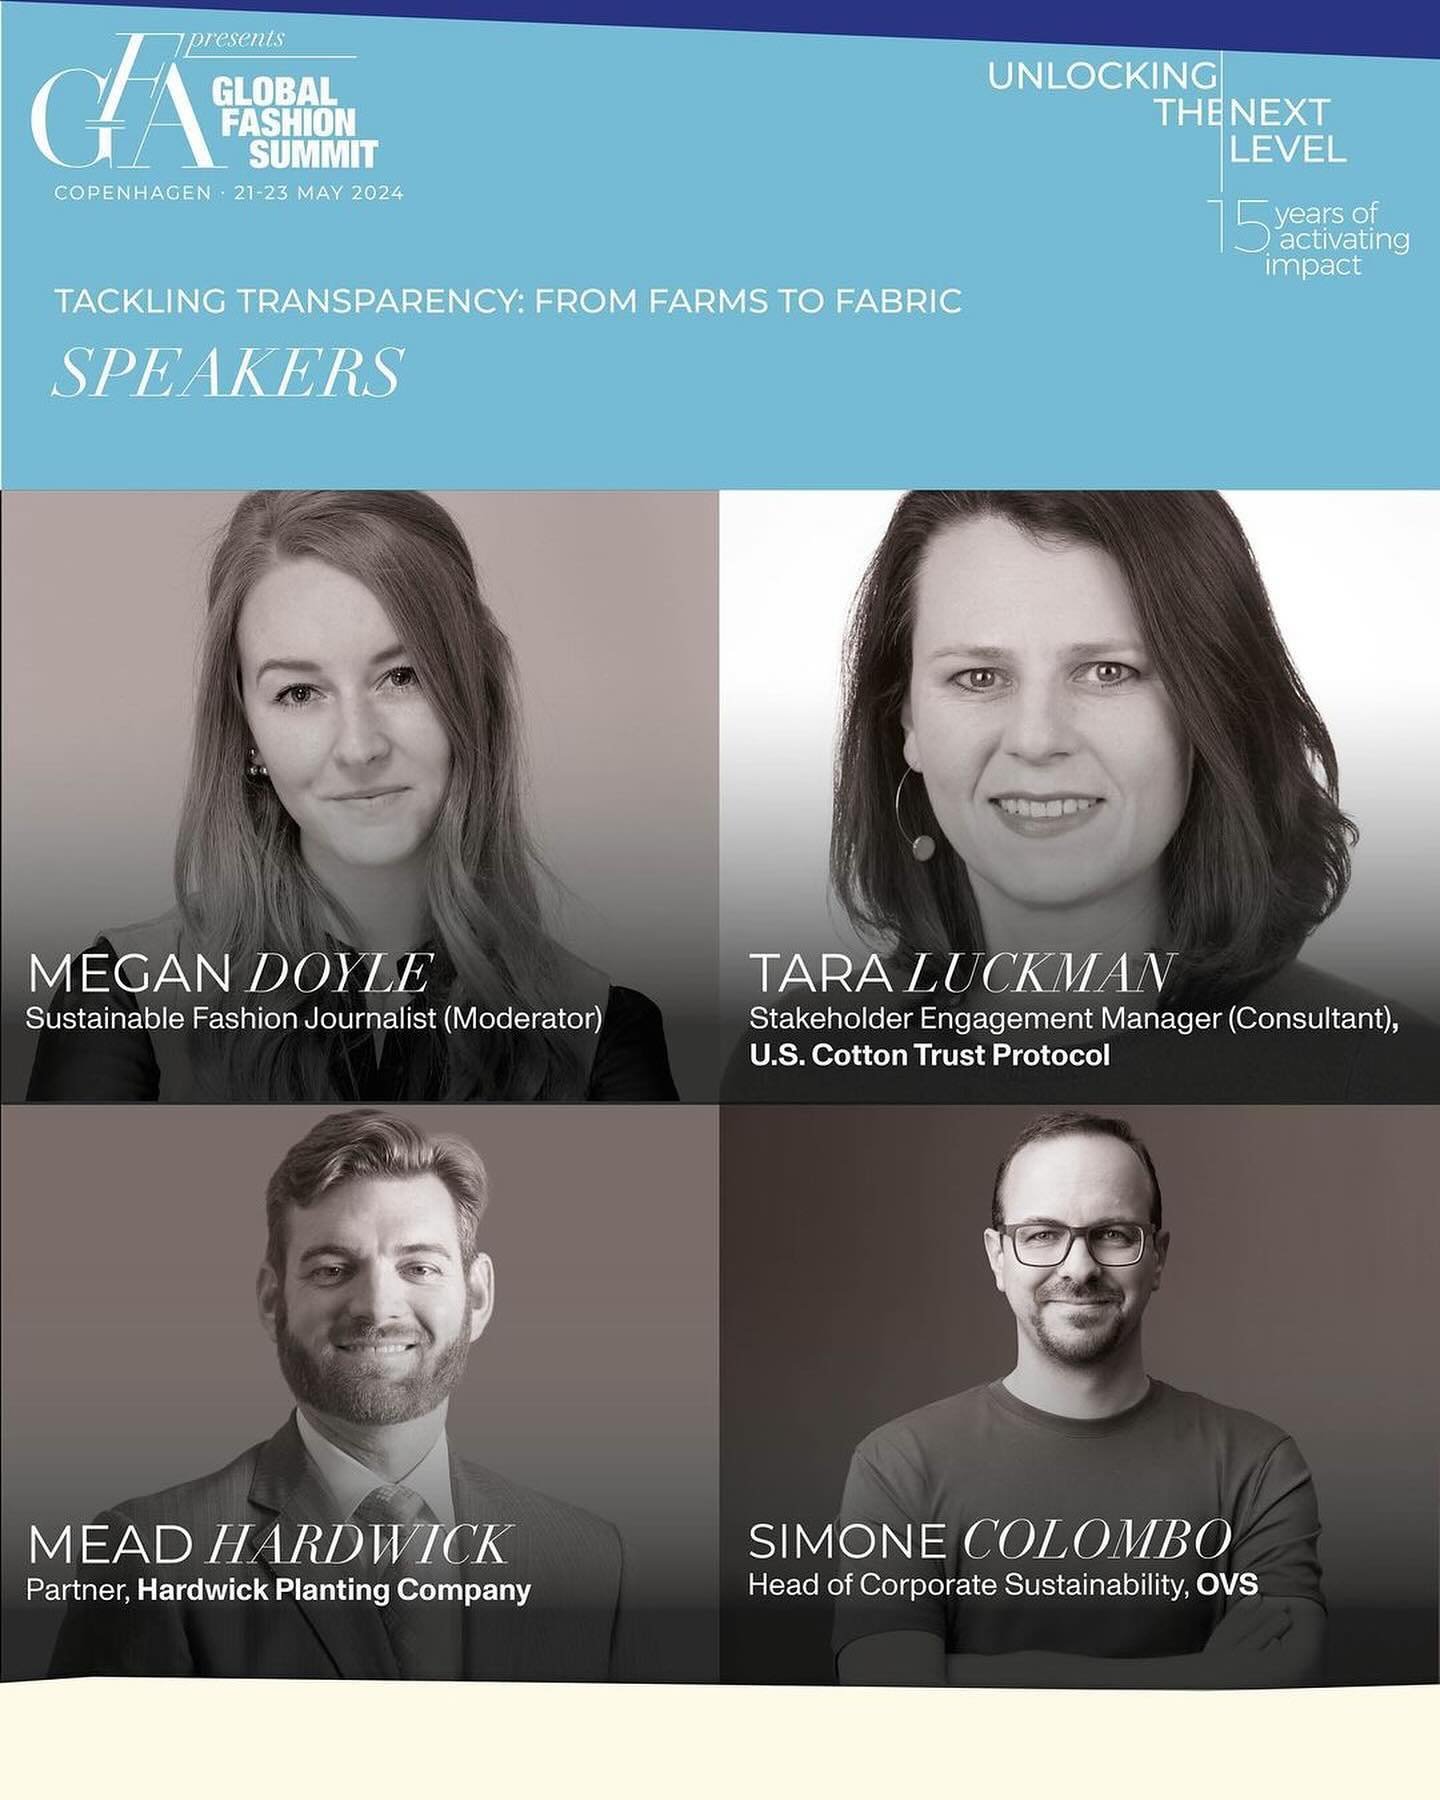 Excited to share the panel discussion I&rsquo;ll be moderating next week at Copenhagen&rsquo;s Global Fashion Summit! 🚀 

Transparency and traceability of global fashion supply chains is a topic I&rsquo;m fascinated by and this conversation will loo